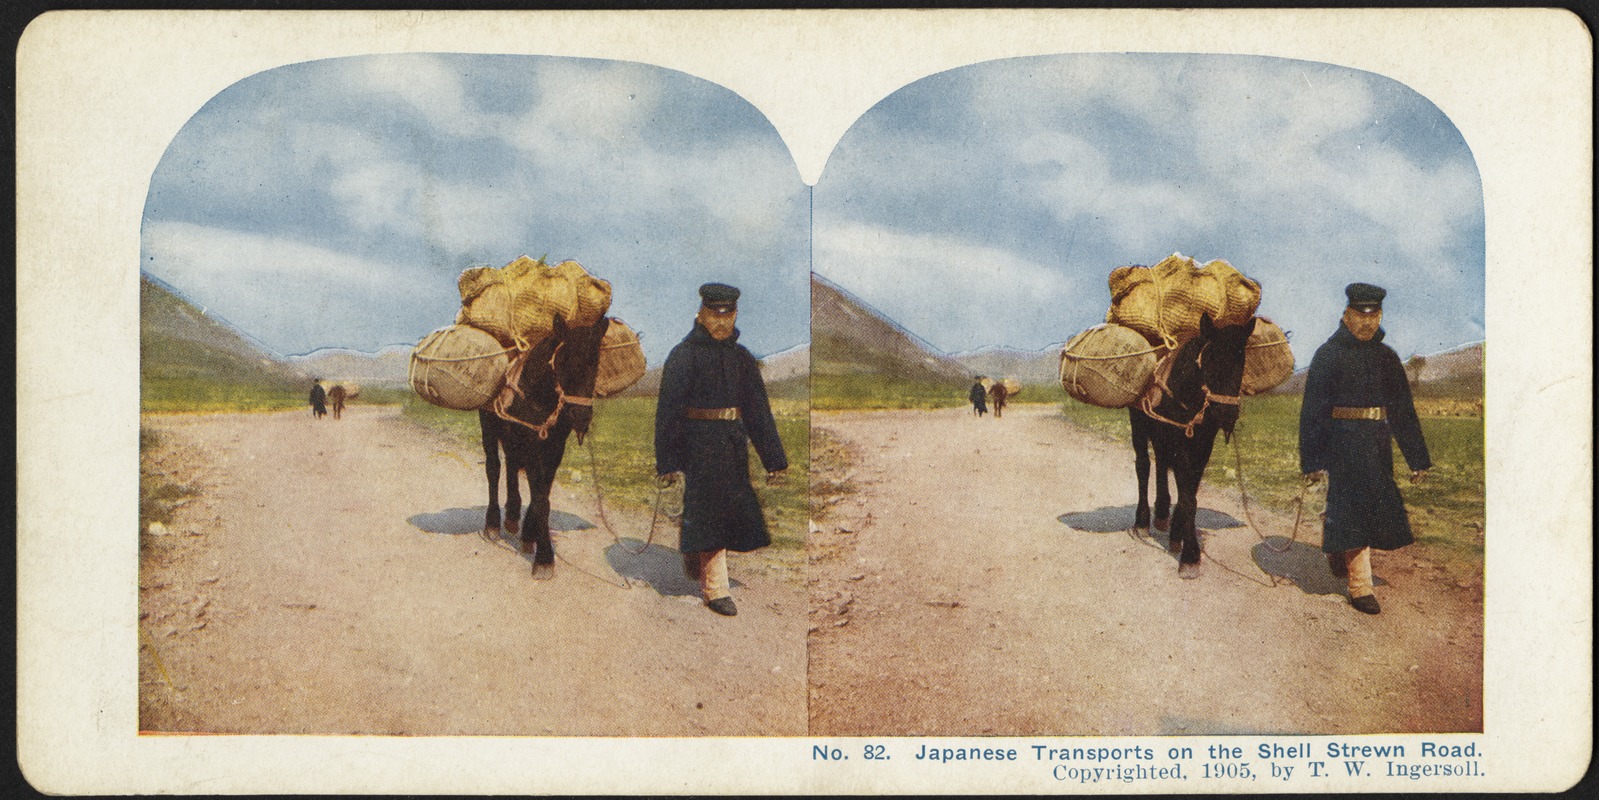 Japanese transports on the shell strewn road